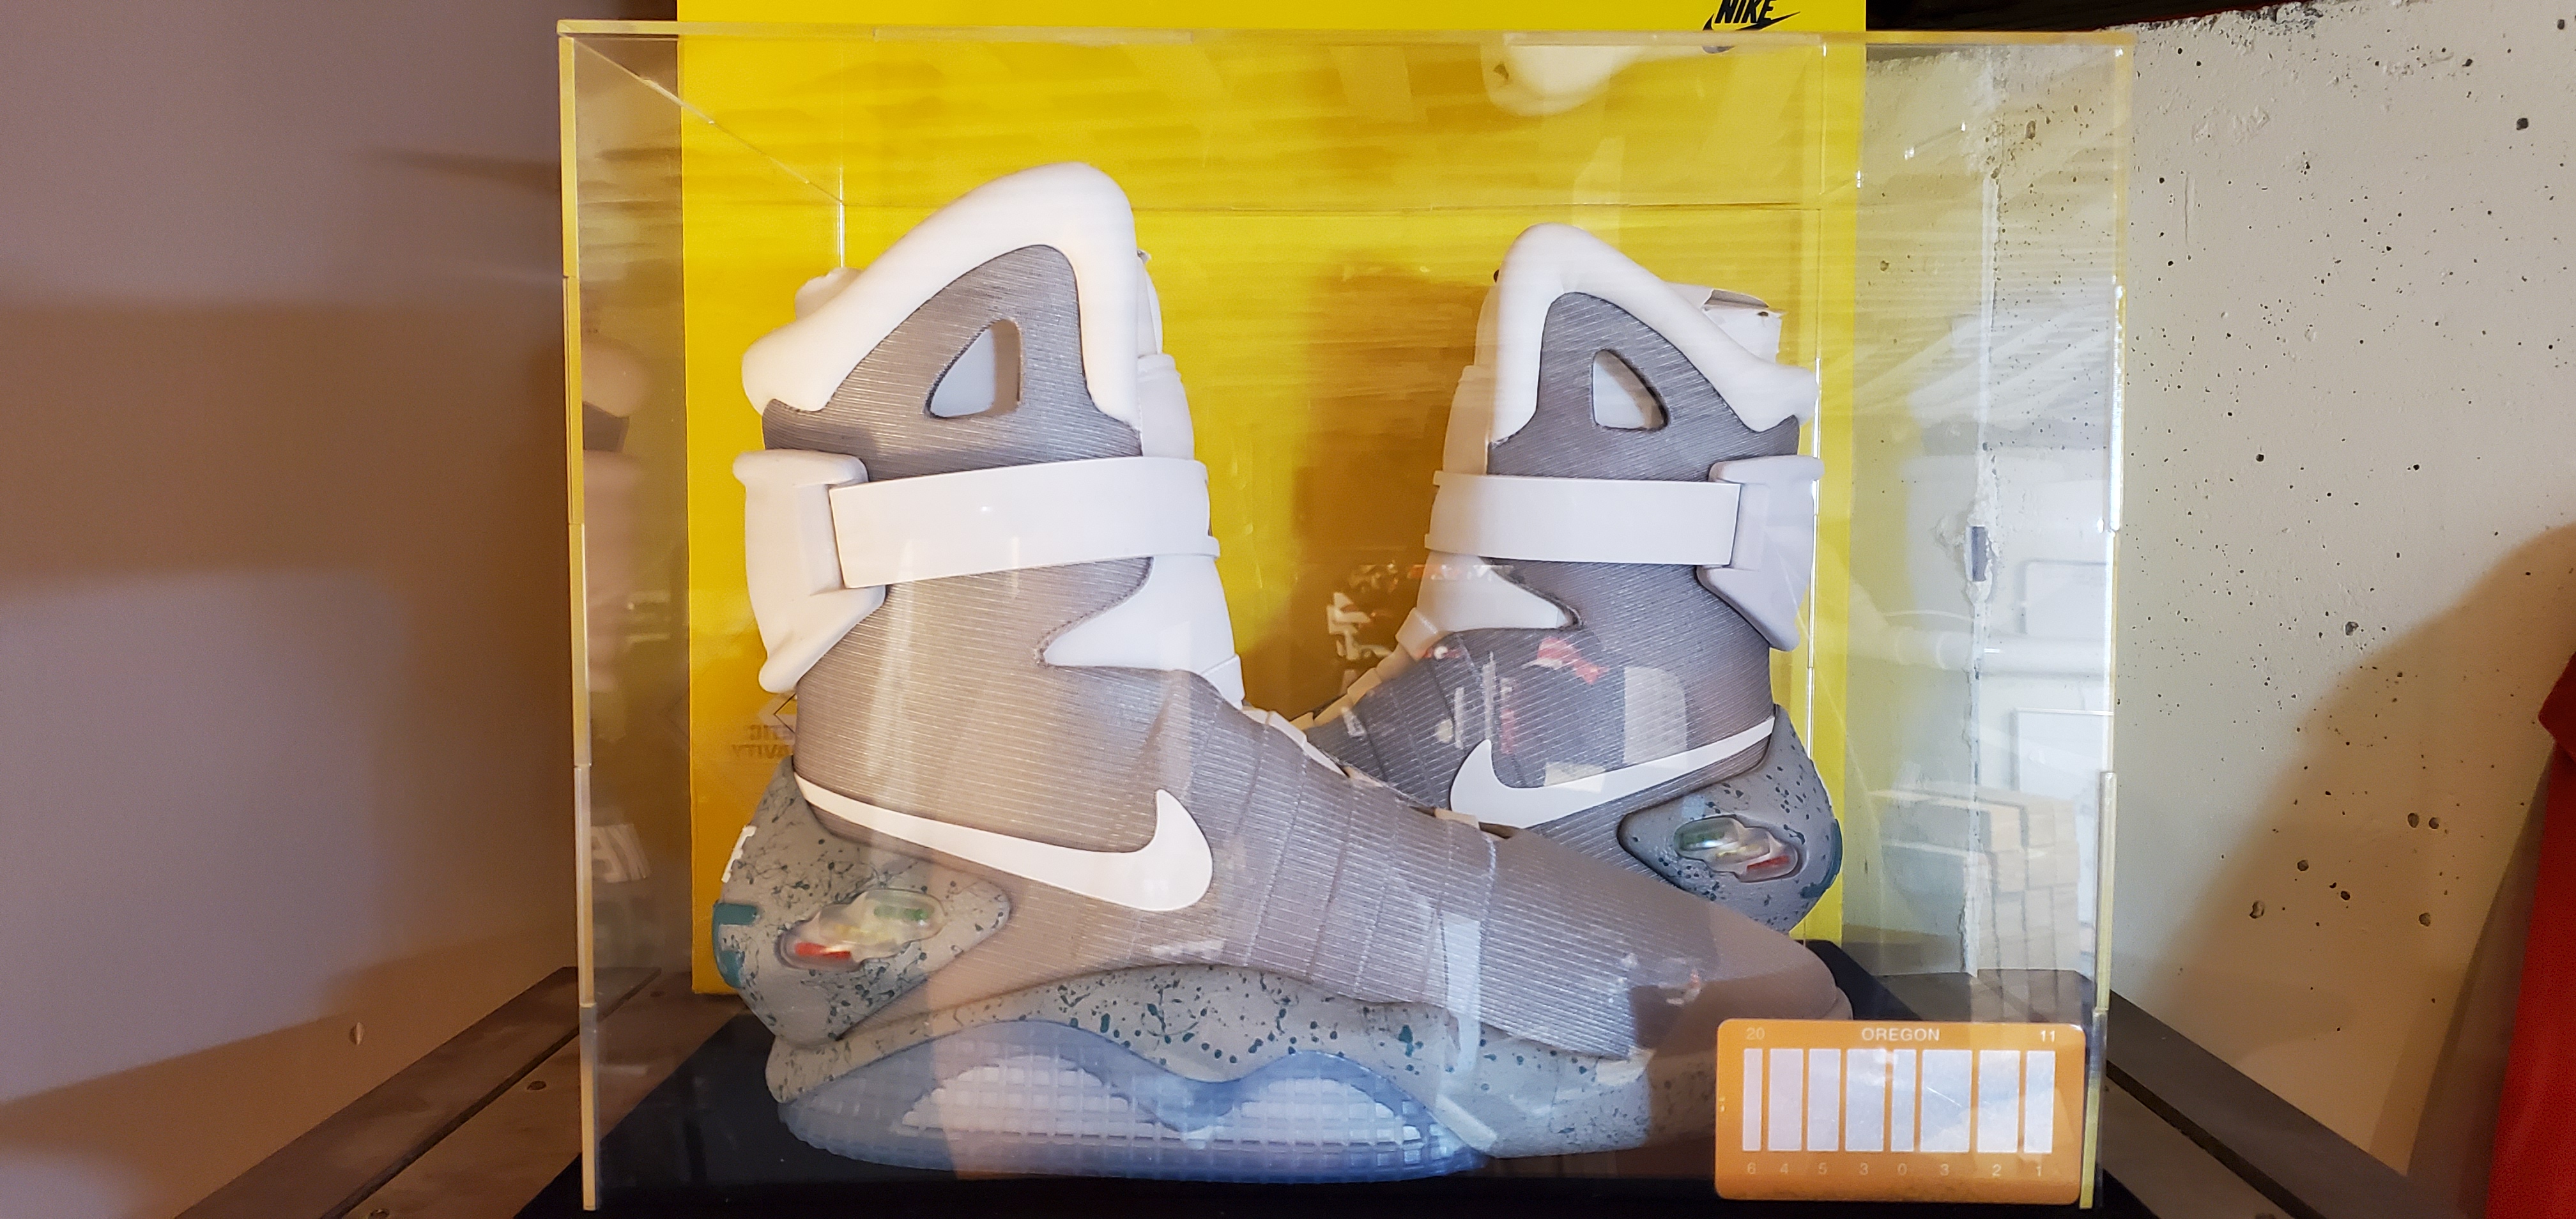 Official V3 Nike MAG Replica Thread - V3 Discussion Thread | Page 195 | RPF  Costume and Prop Maker Community